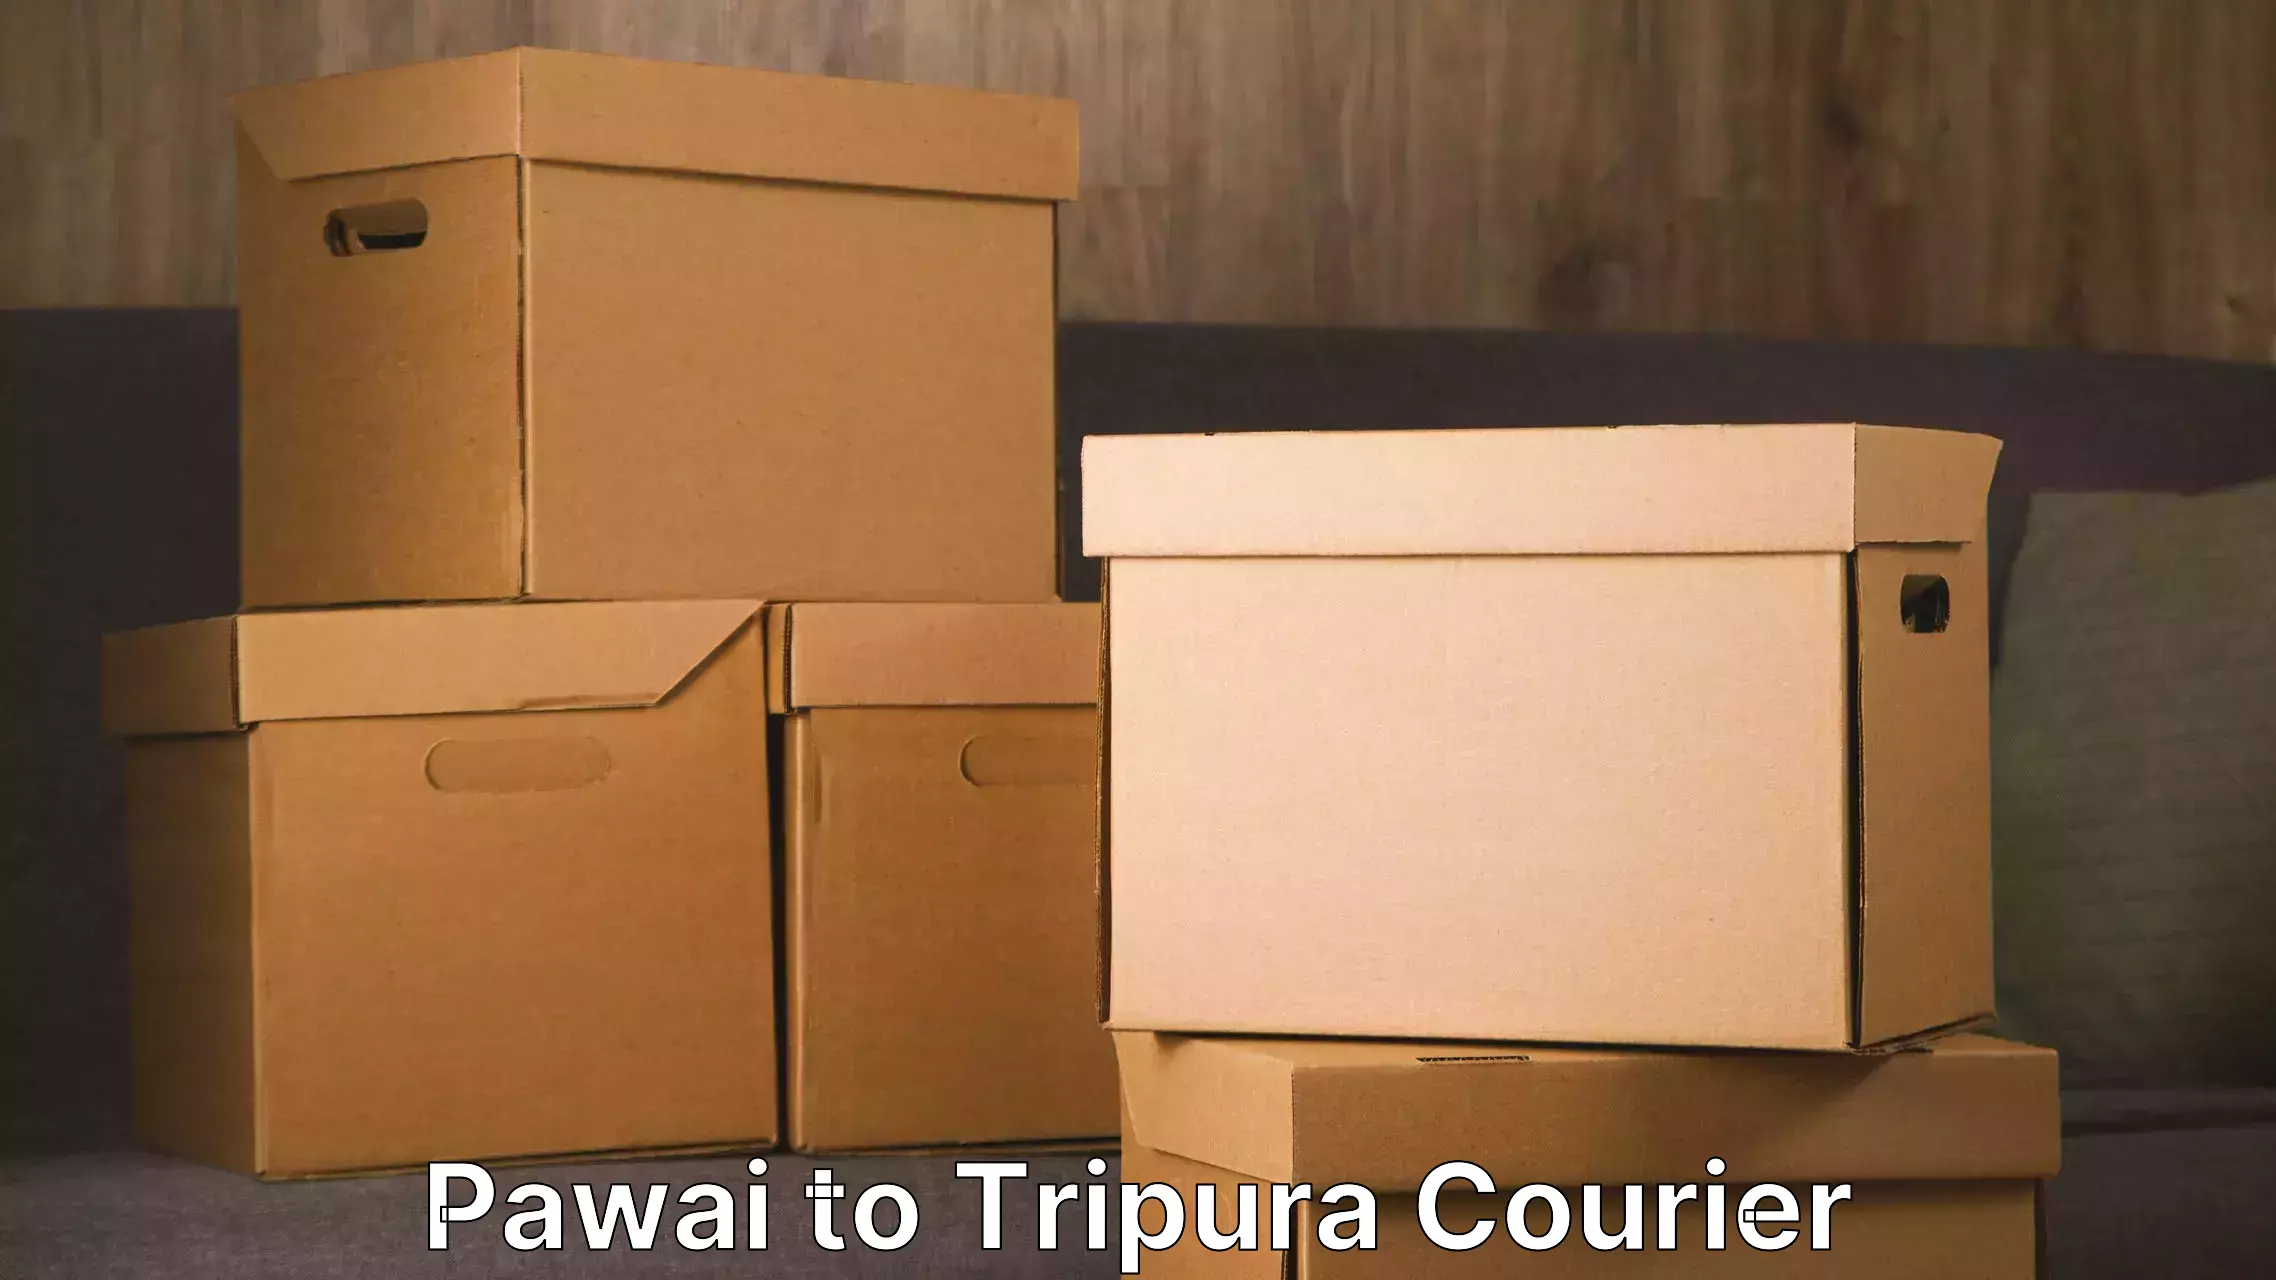 Trusted relocation experts Pawai to West Tripura